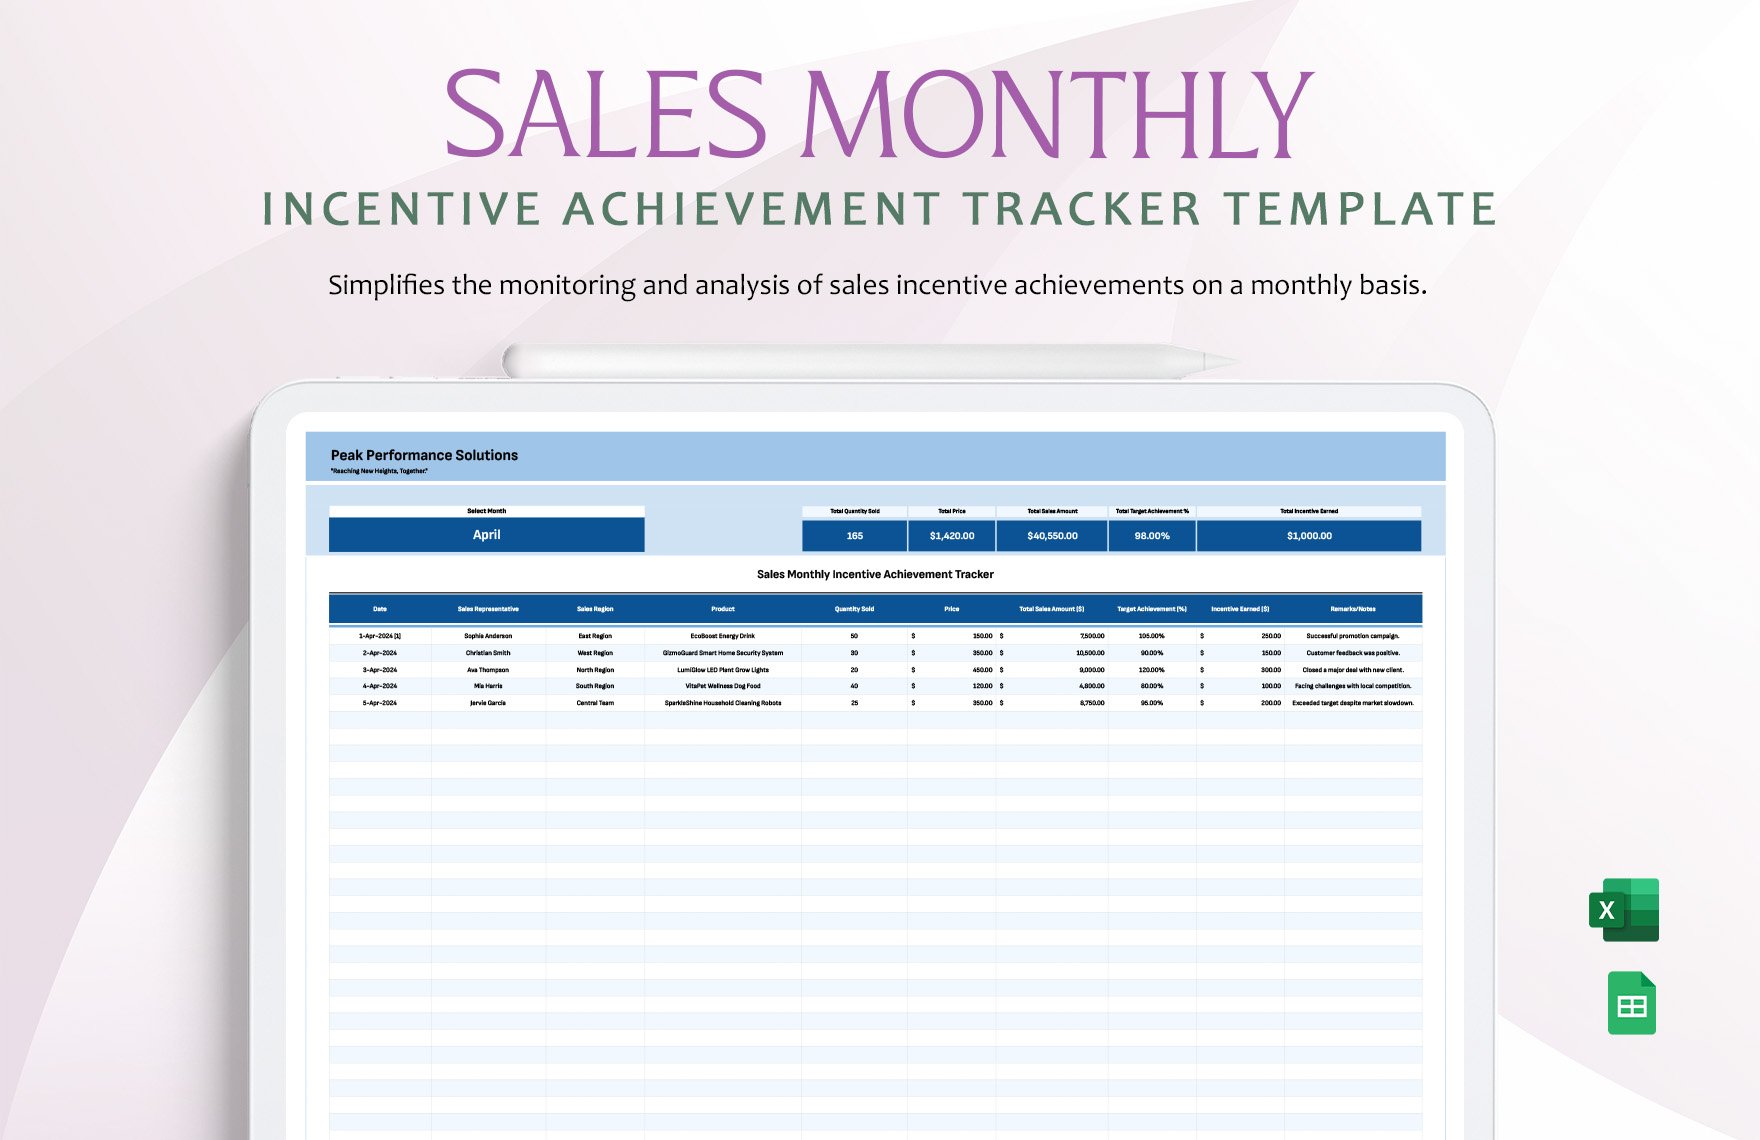 Sales Monthly Incentive Achievement Tracker Template in Excel, Google Sheets